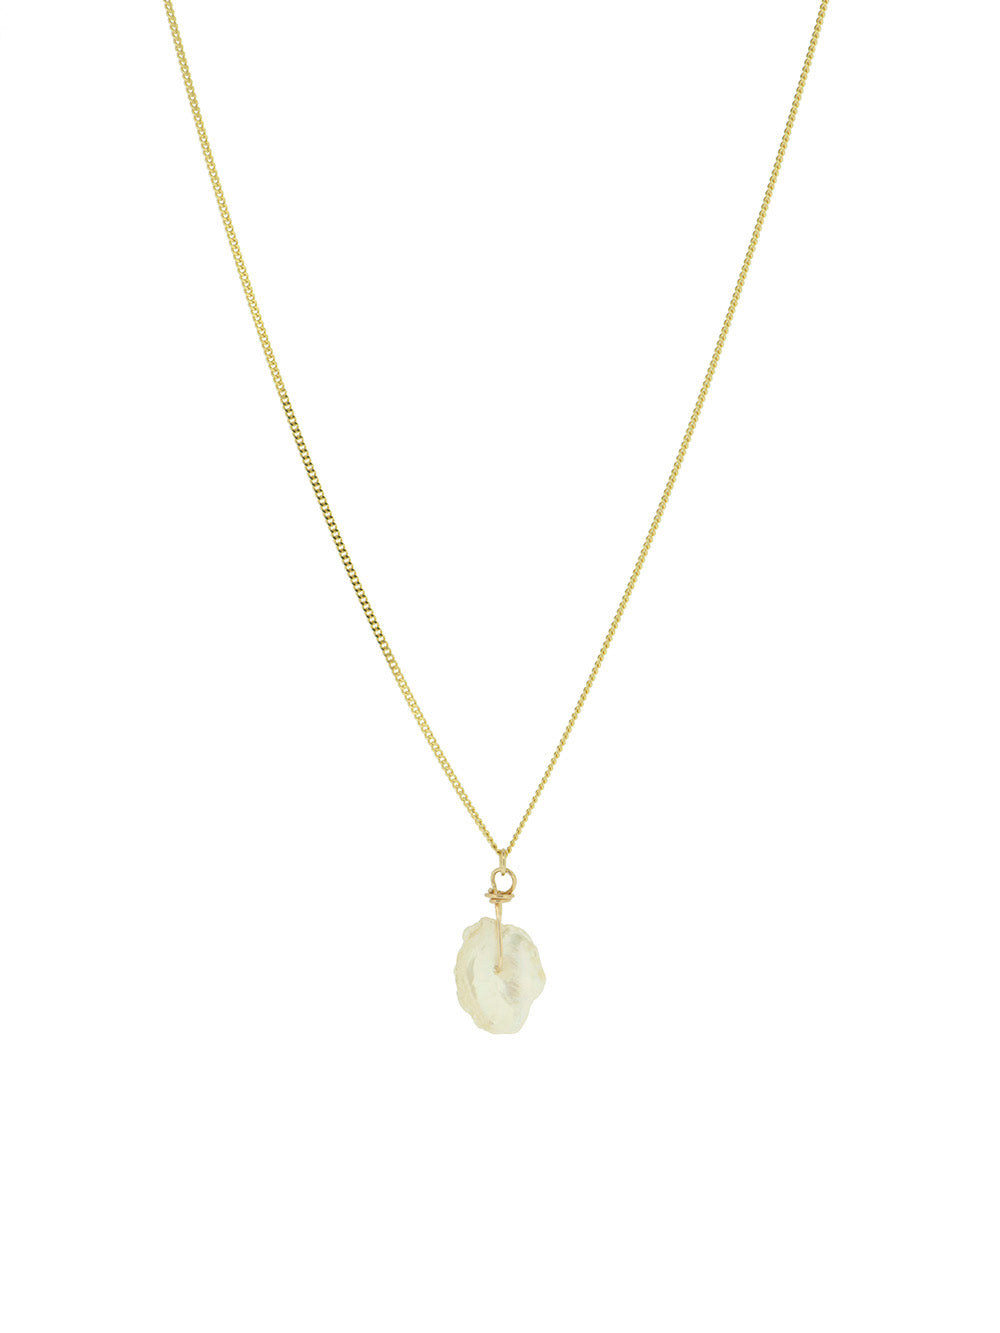 Lois | 14K Solid Gold